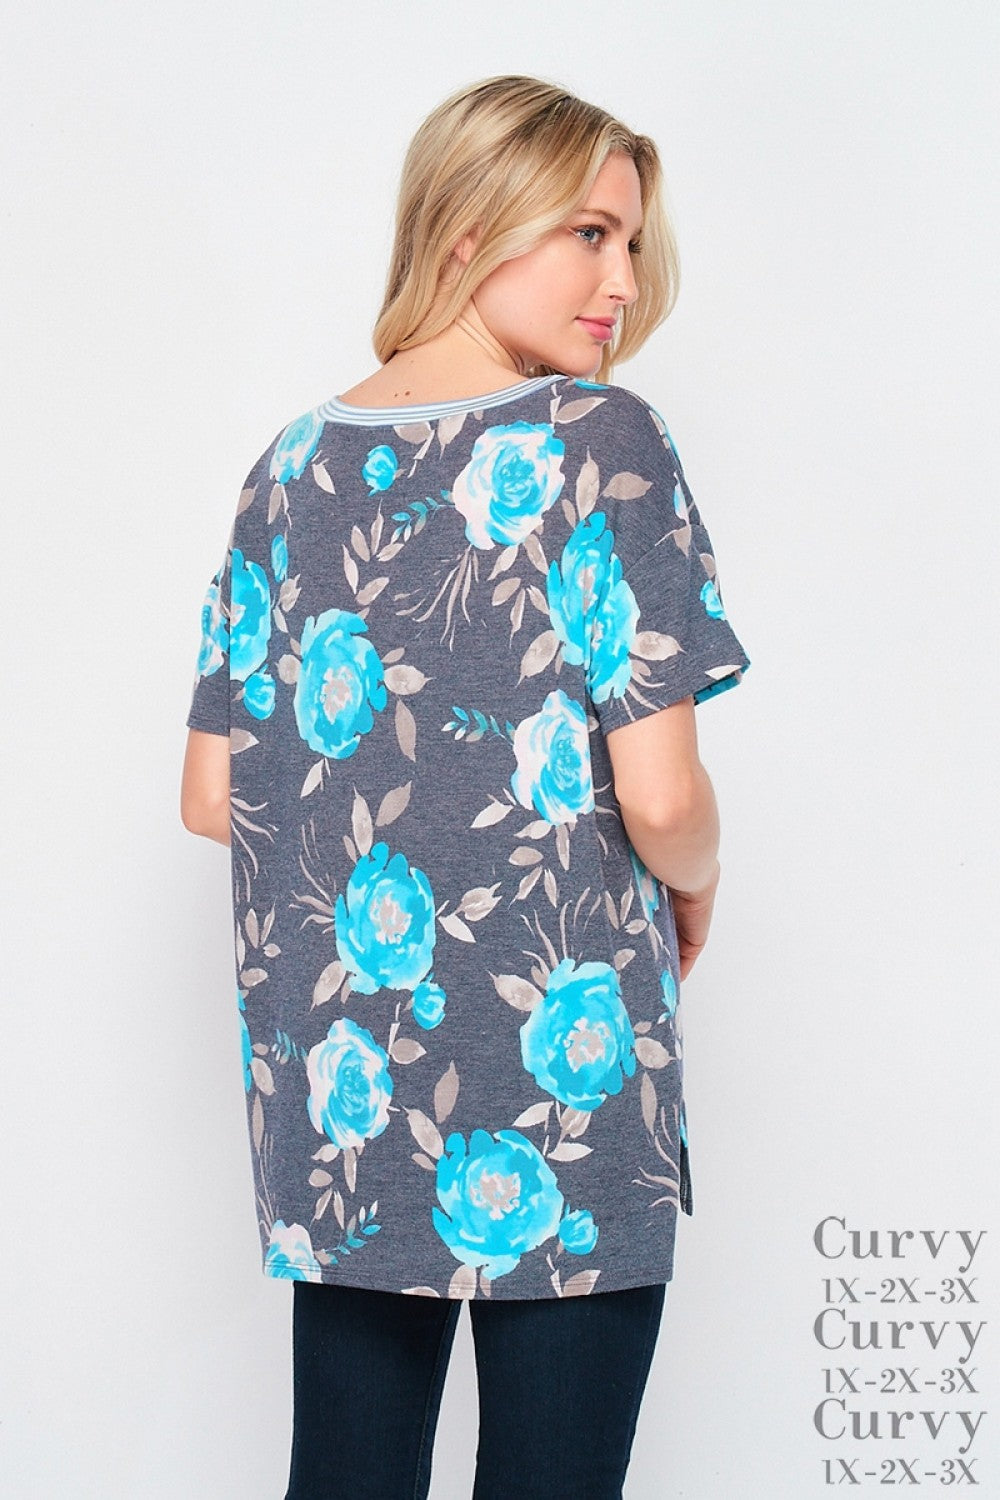 Indigo Teal Floral Pocket Top  Ivy and Pearl Boutique   